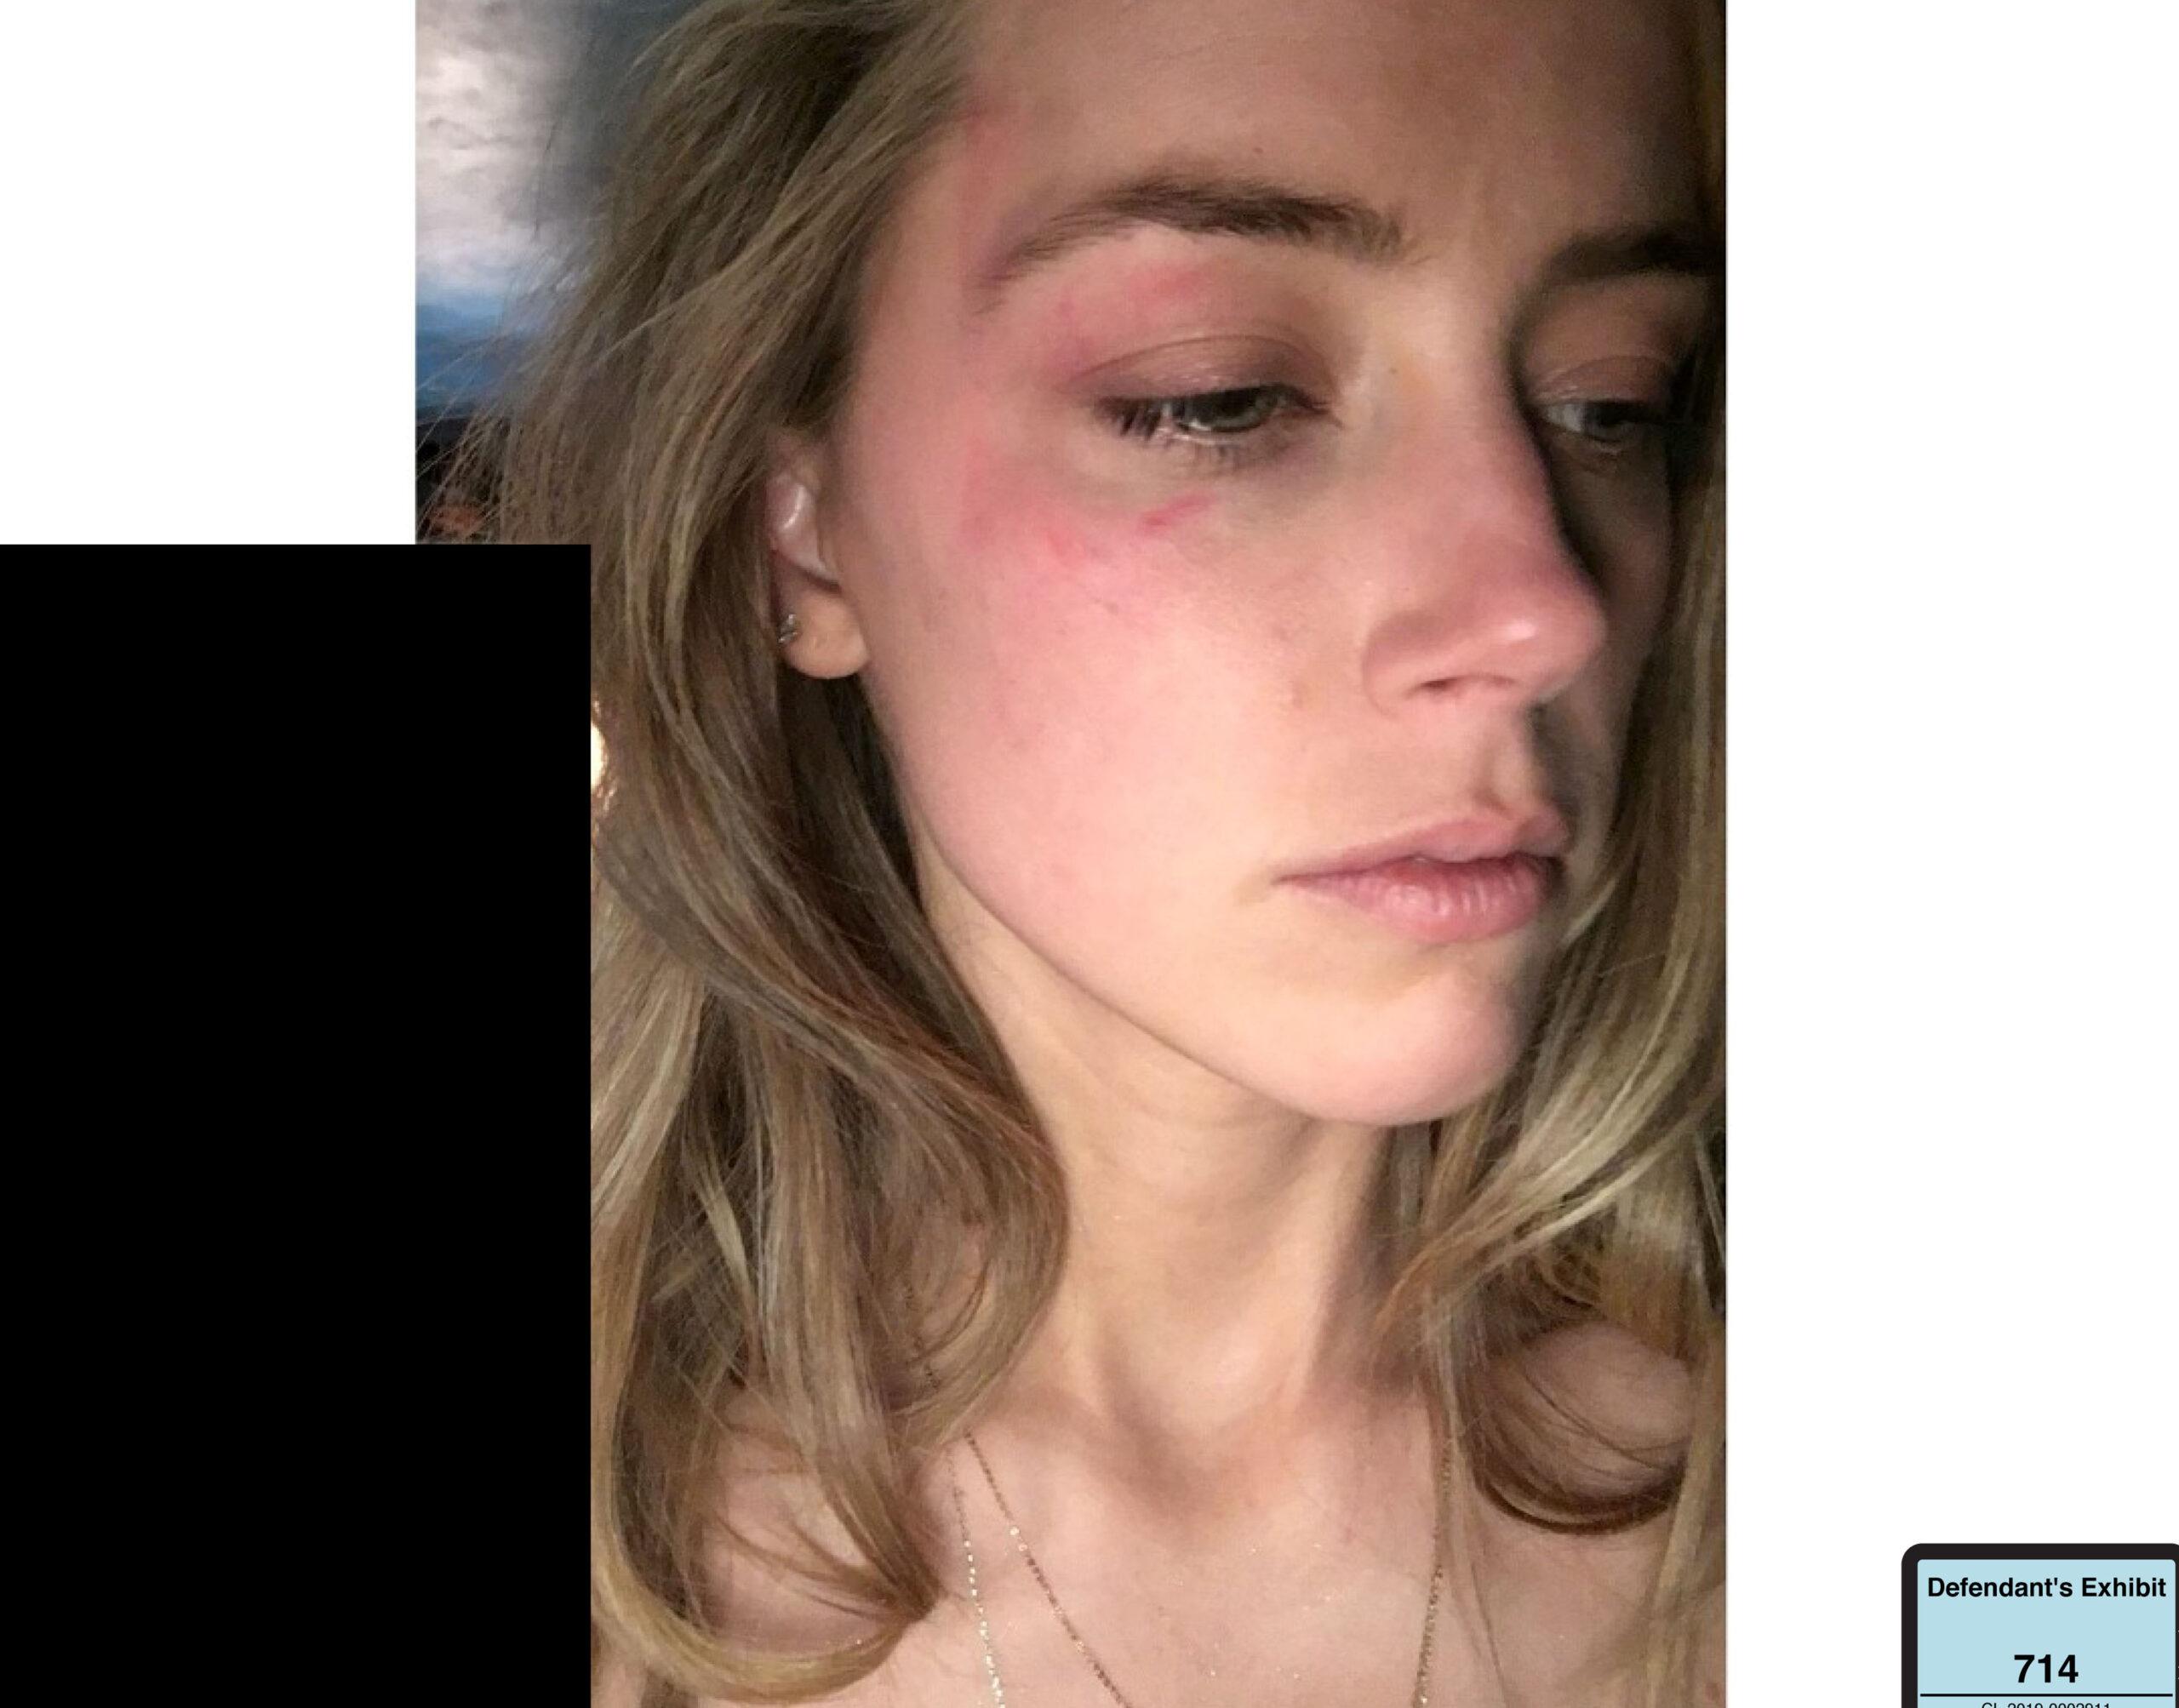 Amber Heard has been accused of editing photos of her apparently bruised face by a lawyer for Johnny Depp in the ex-couple’s defamation trial.